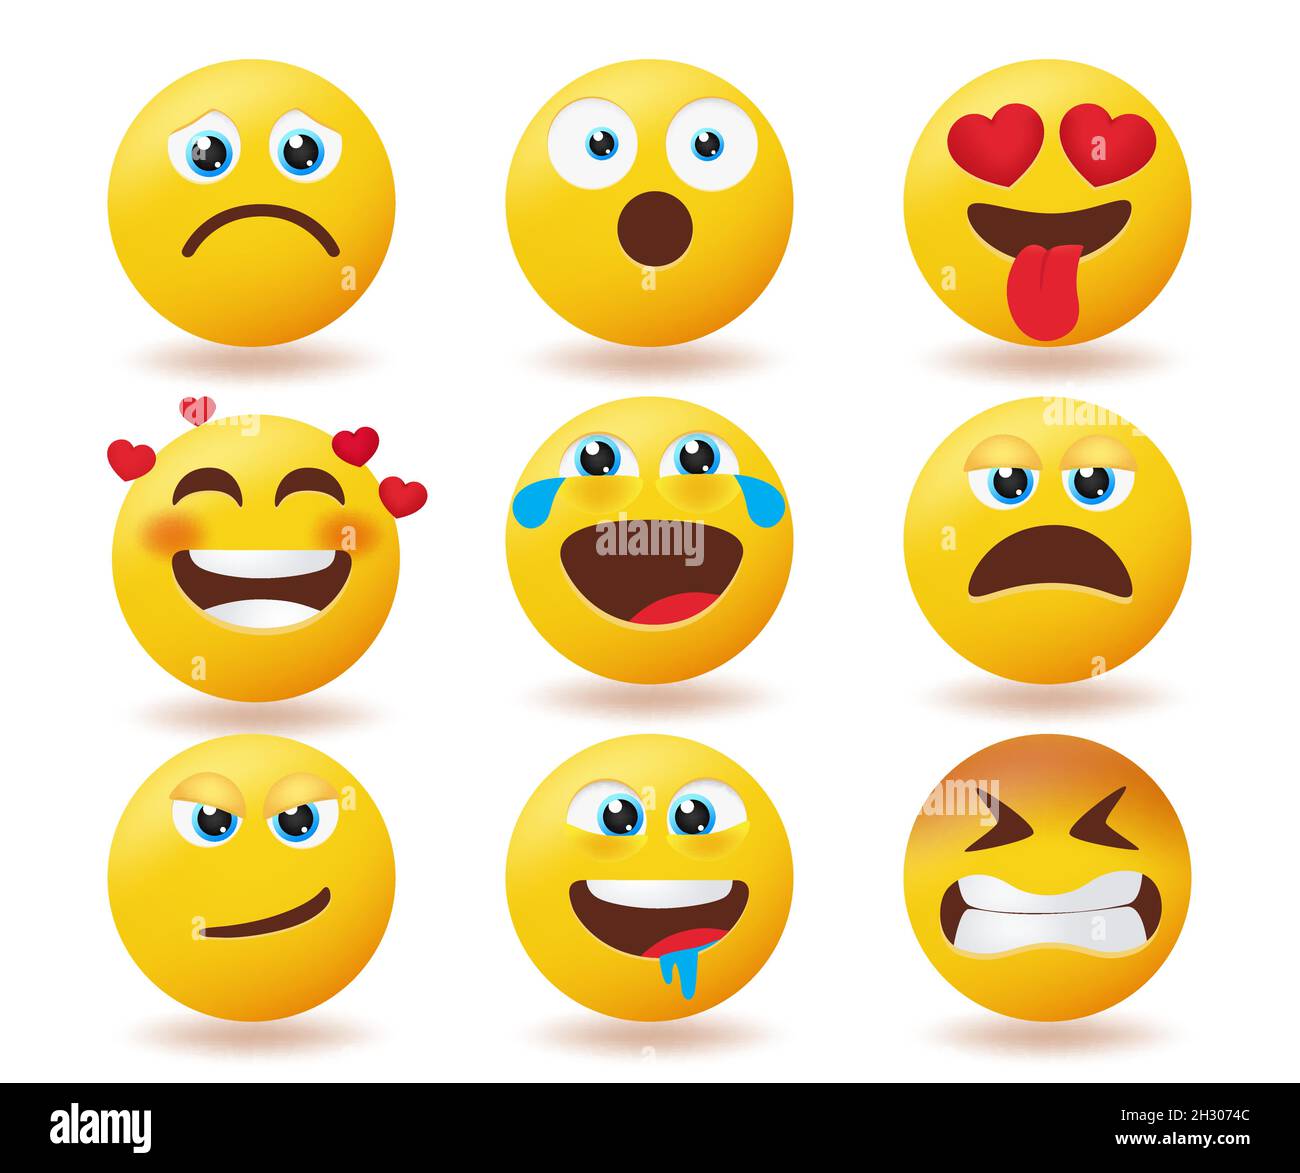 Smileys emoji reaction vector set. Emojis smiley yellow faces collection with facial expression isolated in white background for emoticons face. Stock Vector